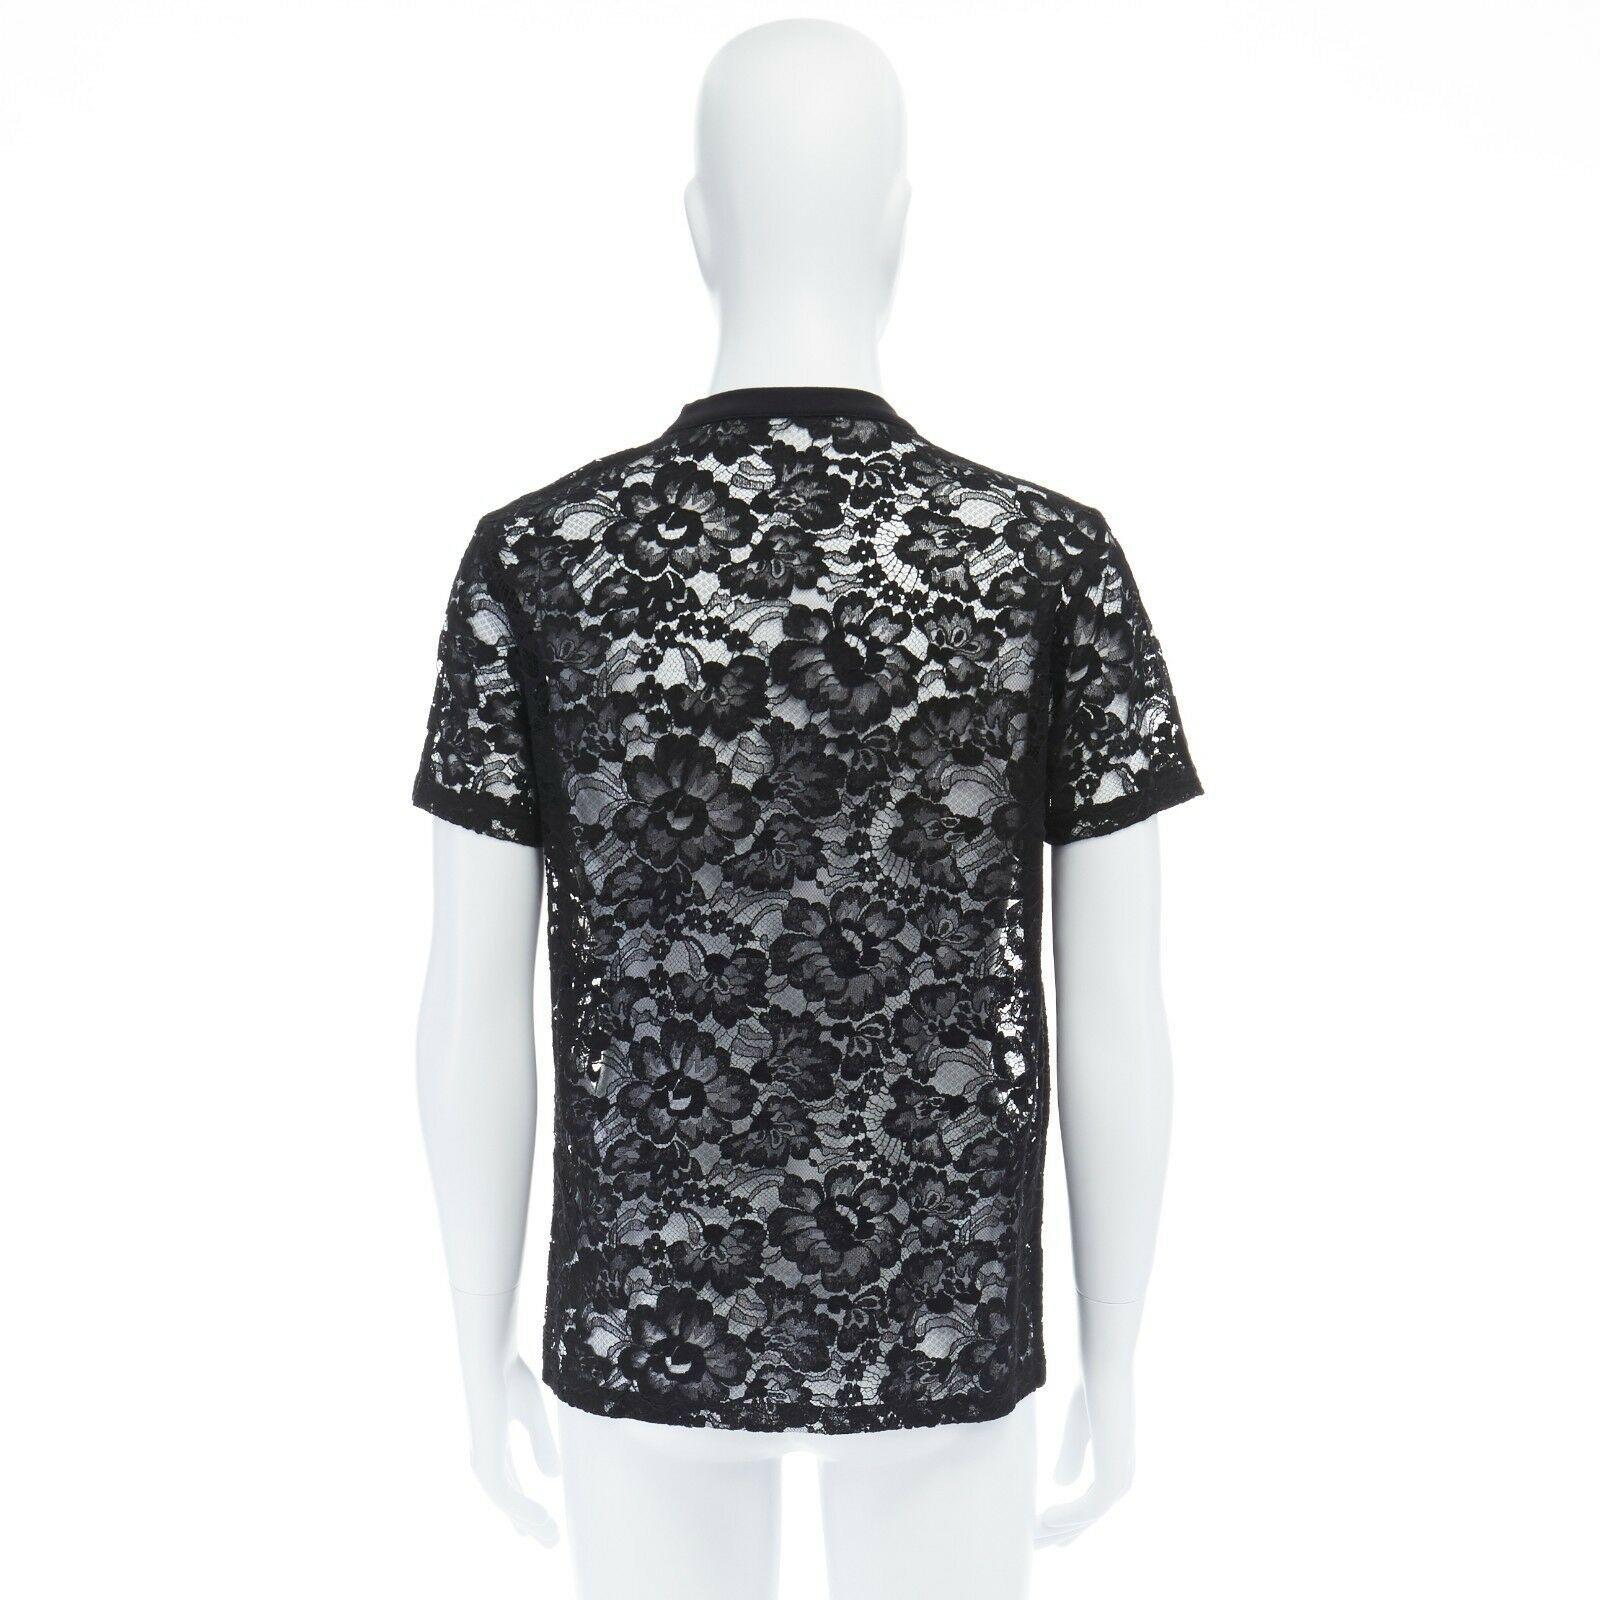 Black GIVENCHY TISCI black sheer lace Pervert 17 patched football jersey top IT38 M